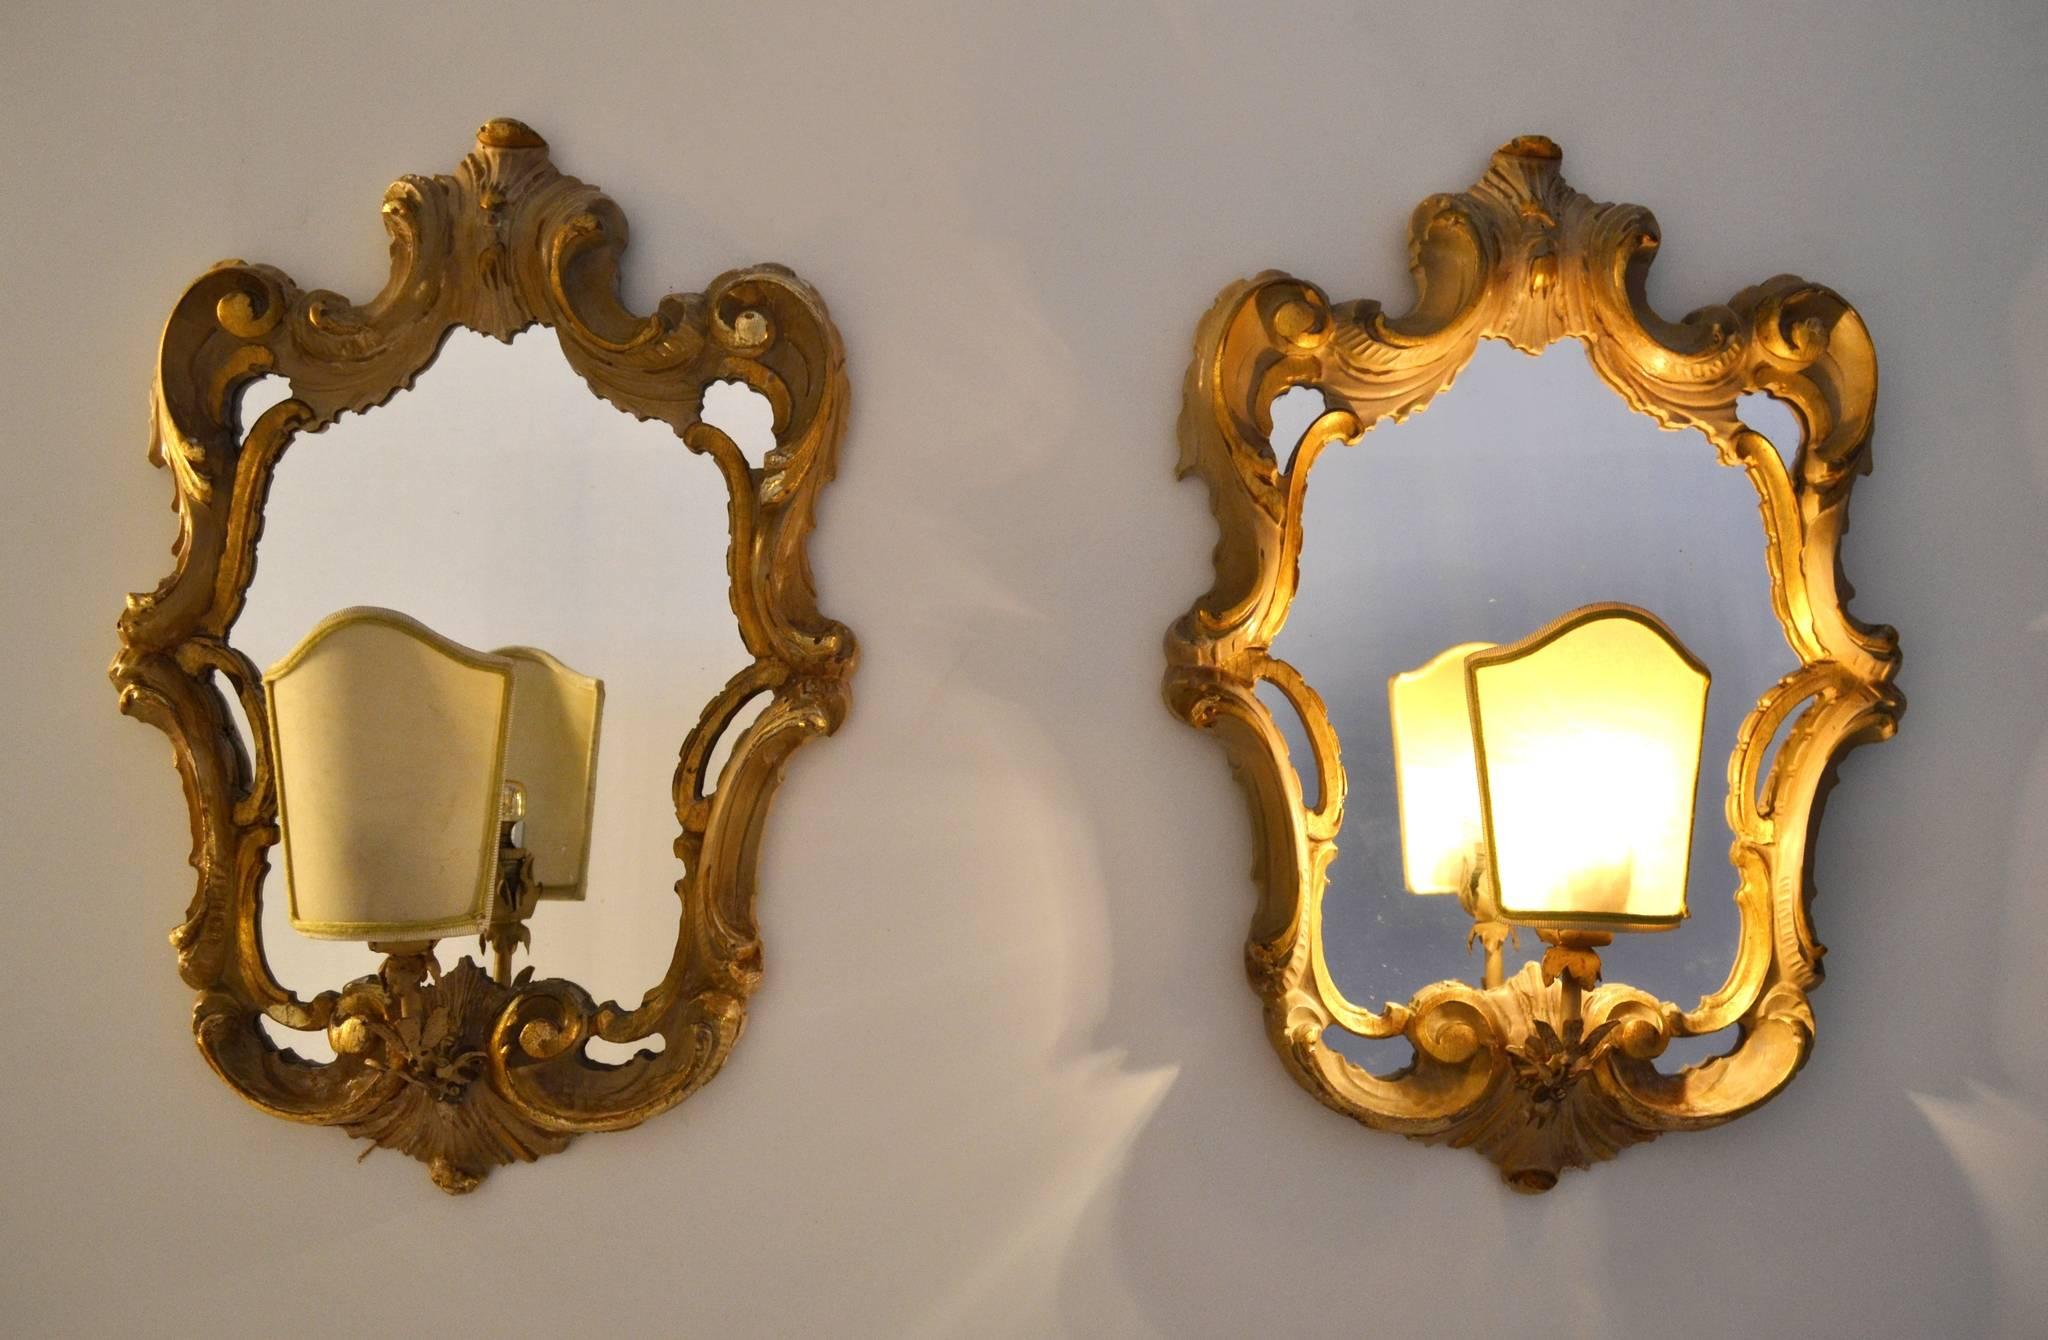 A pair of ivory and gold colored electrified hand-carved wall sconces in Rococo style produced circa 1940 in Italy.